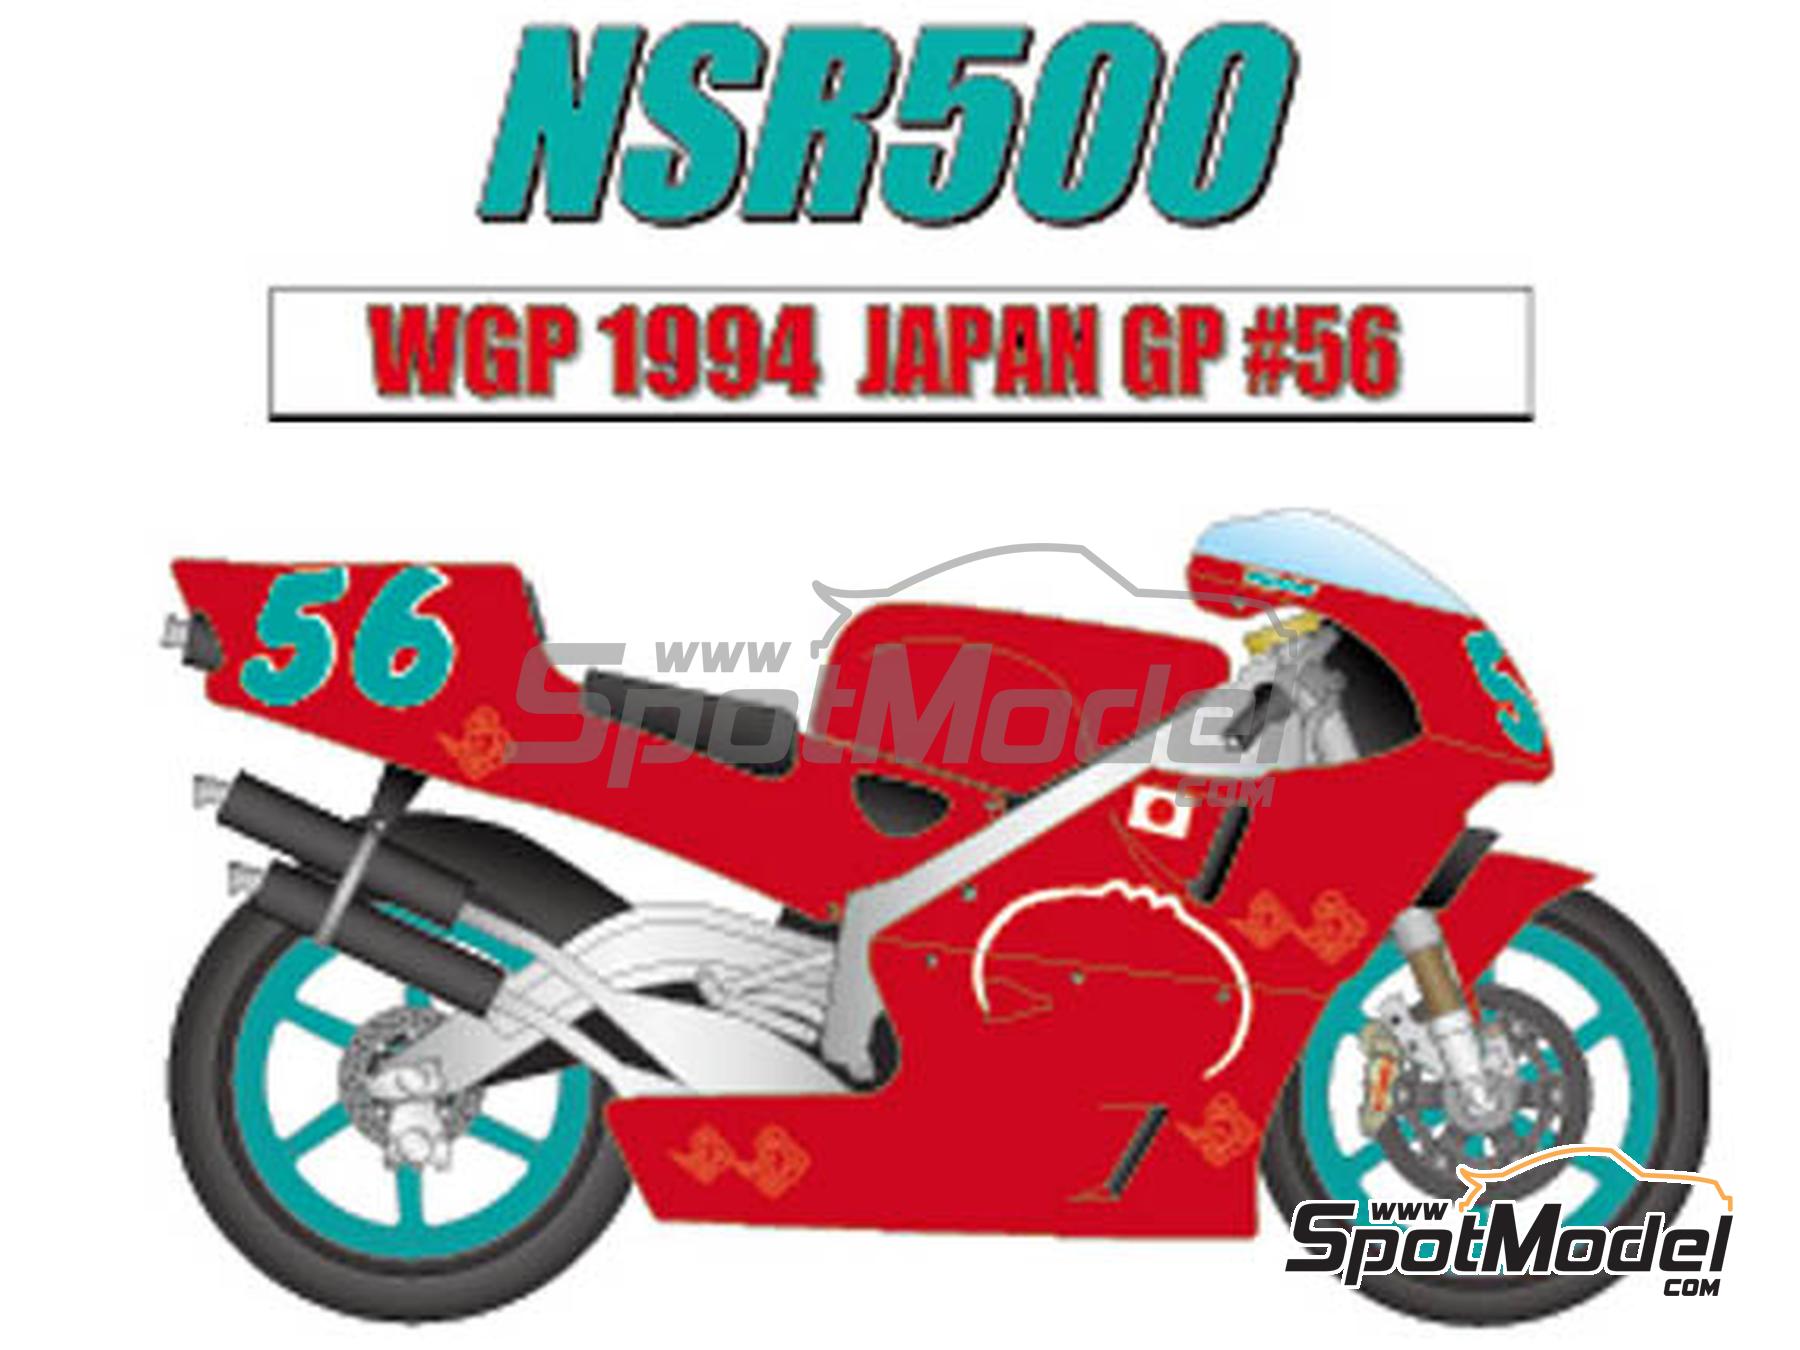 Honda NSR500 Mister Yumcha Blue Fox Team sponsored by Mister Donut -  Motorcycle Japanese Grand Prix 500cc 1994. Transkit in 1/12 scale  manufactured by